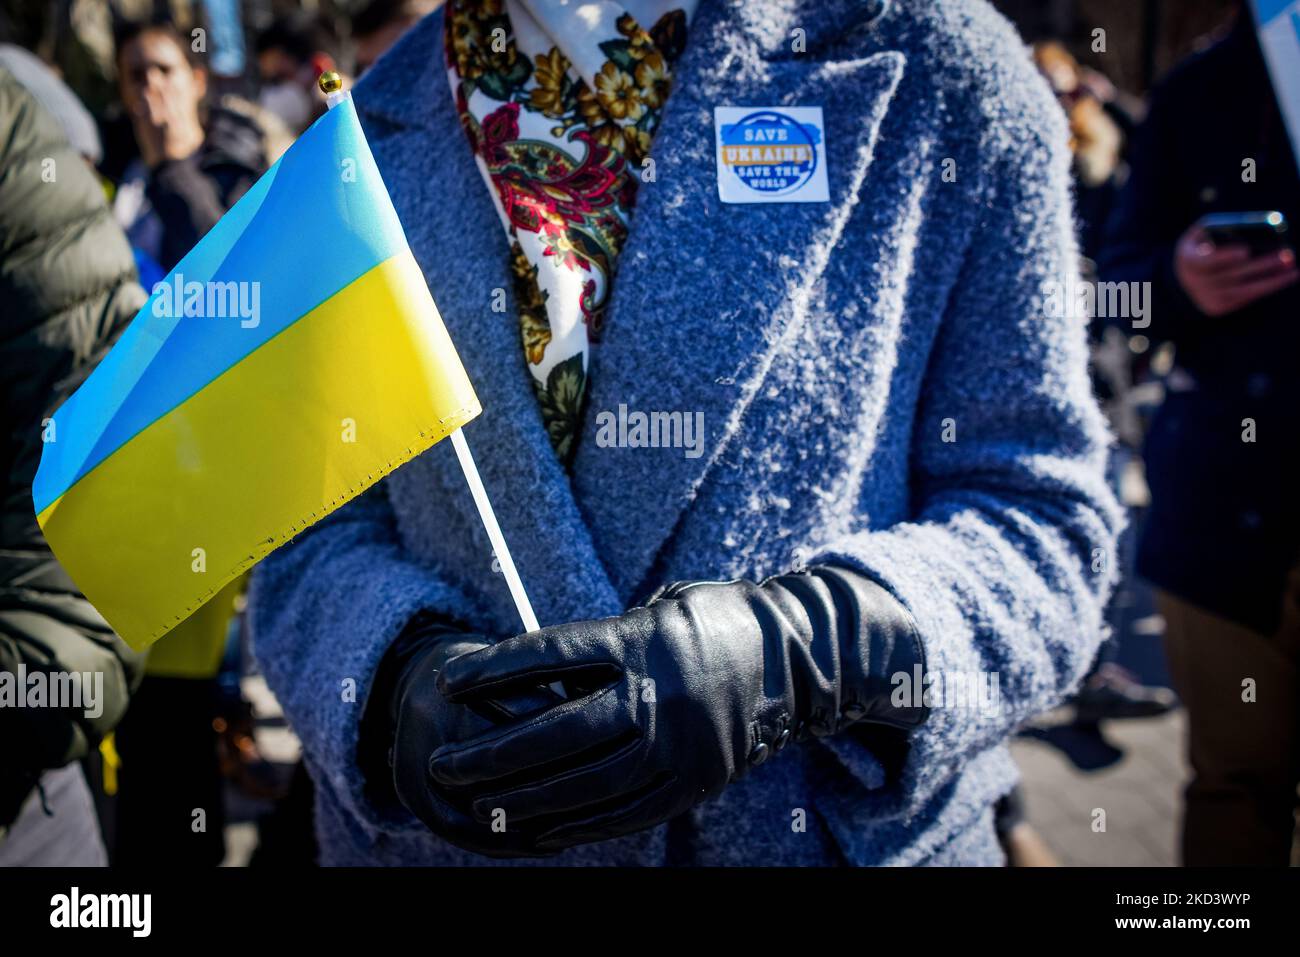 A demonstrator holds a Ukrainian flag at Washington Square Park Sunday February 27, 2022 in New York, NY. Earlier today, Vladimir Putin announced that nuclear forces would be put on high alert in response to aggressive statements made by leading NATO powers. (Erin Lefevre/NurPhoto) (Photo by Erin Lefevre/NurPhoto) Stock Photo